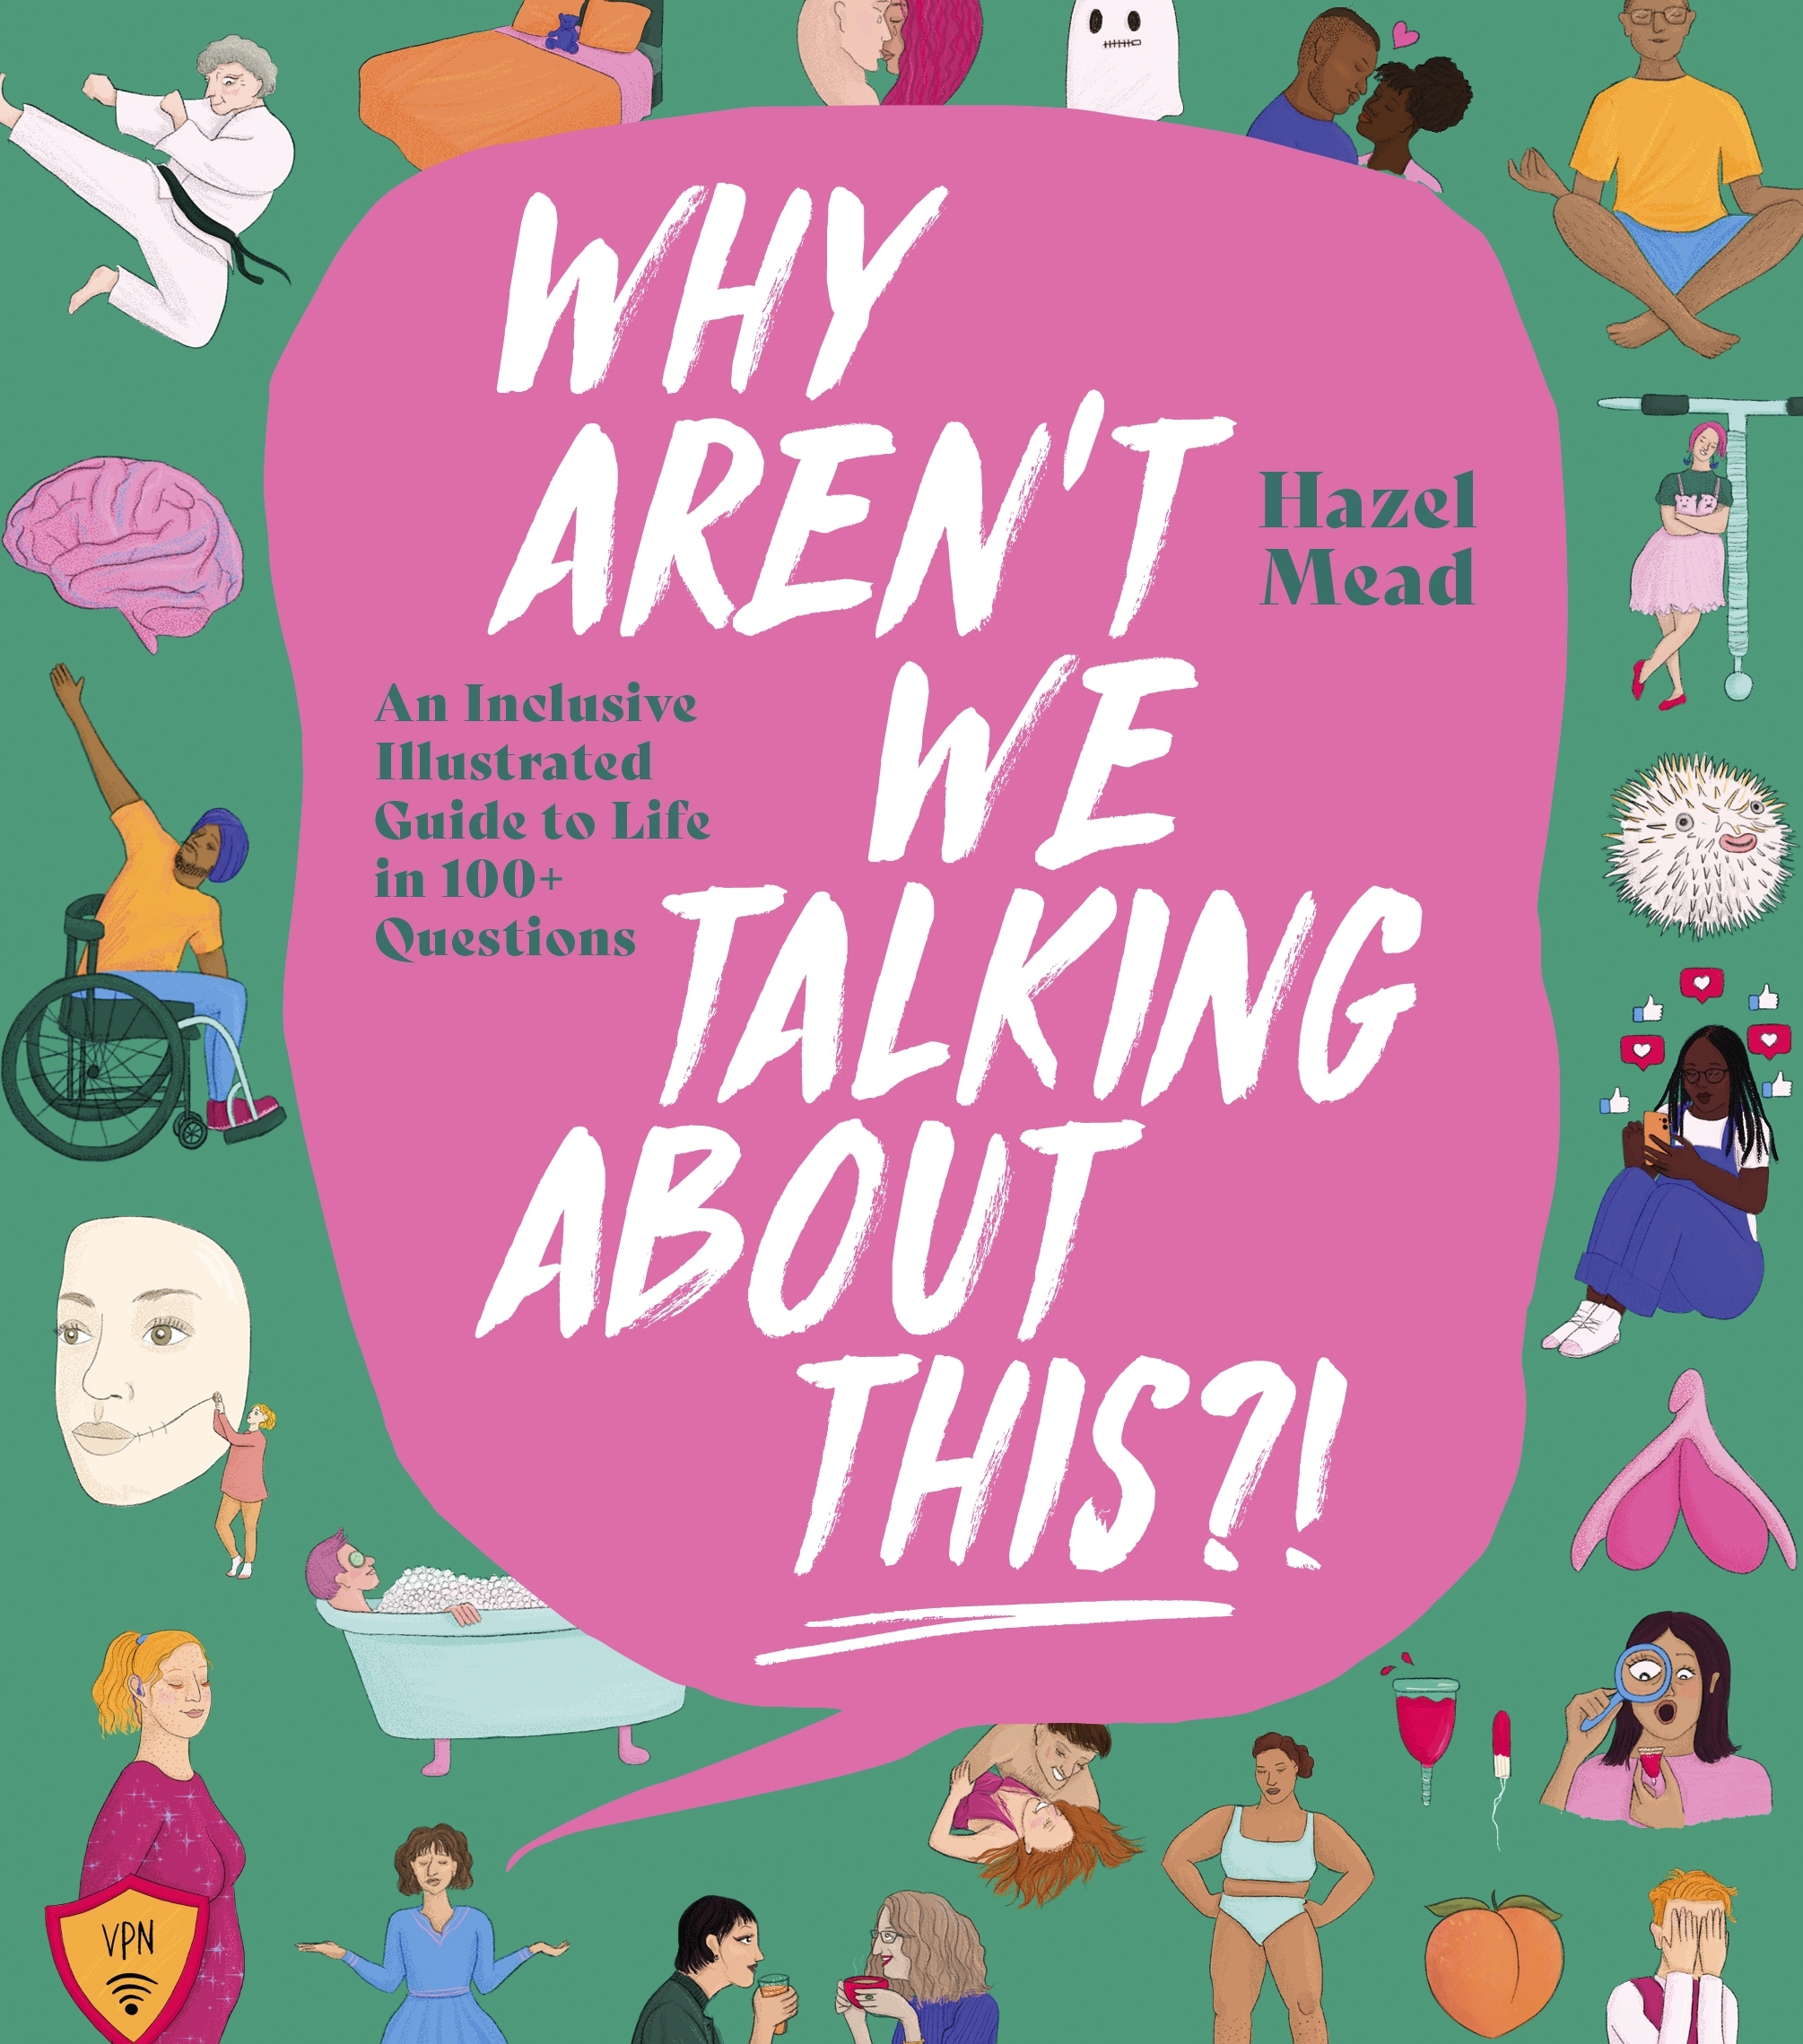 Why Arent We Talking About This By Hazel Mead Penguin Books New Zealand 0152